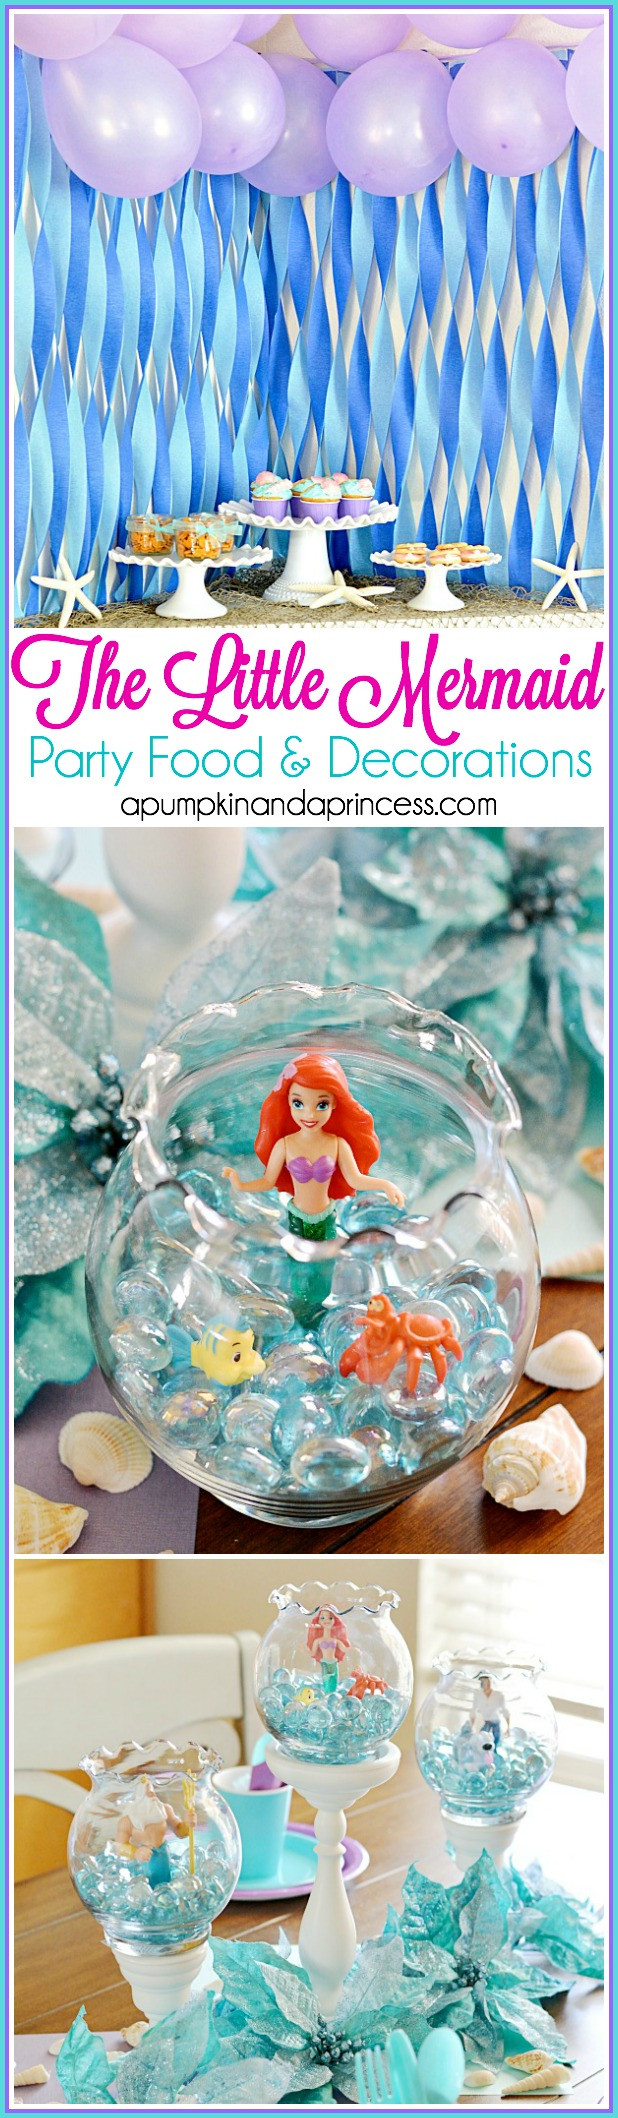 Ariel Birthday Decorations
 The Little Mermaid Party A Pumpkin And A Princess